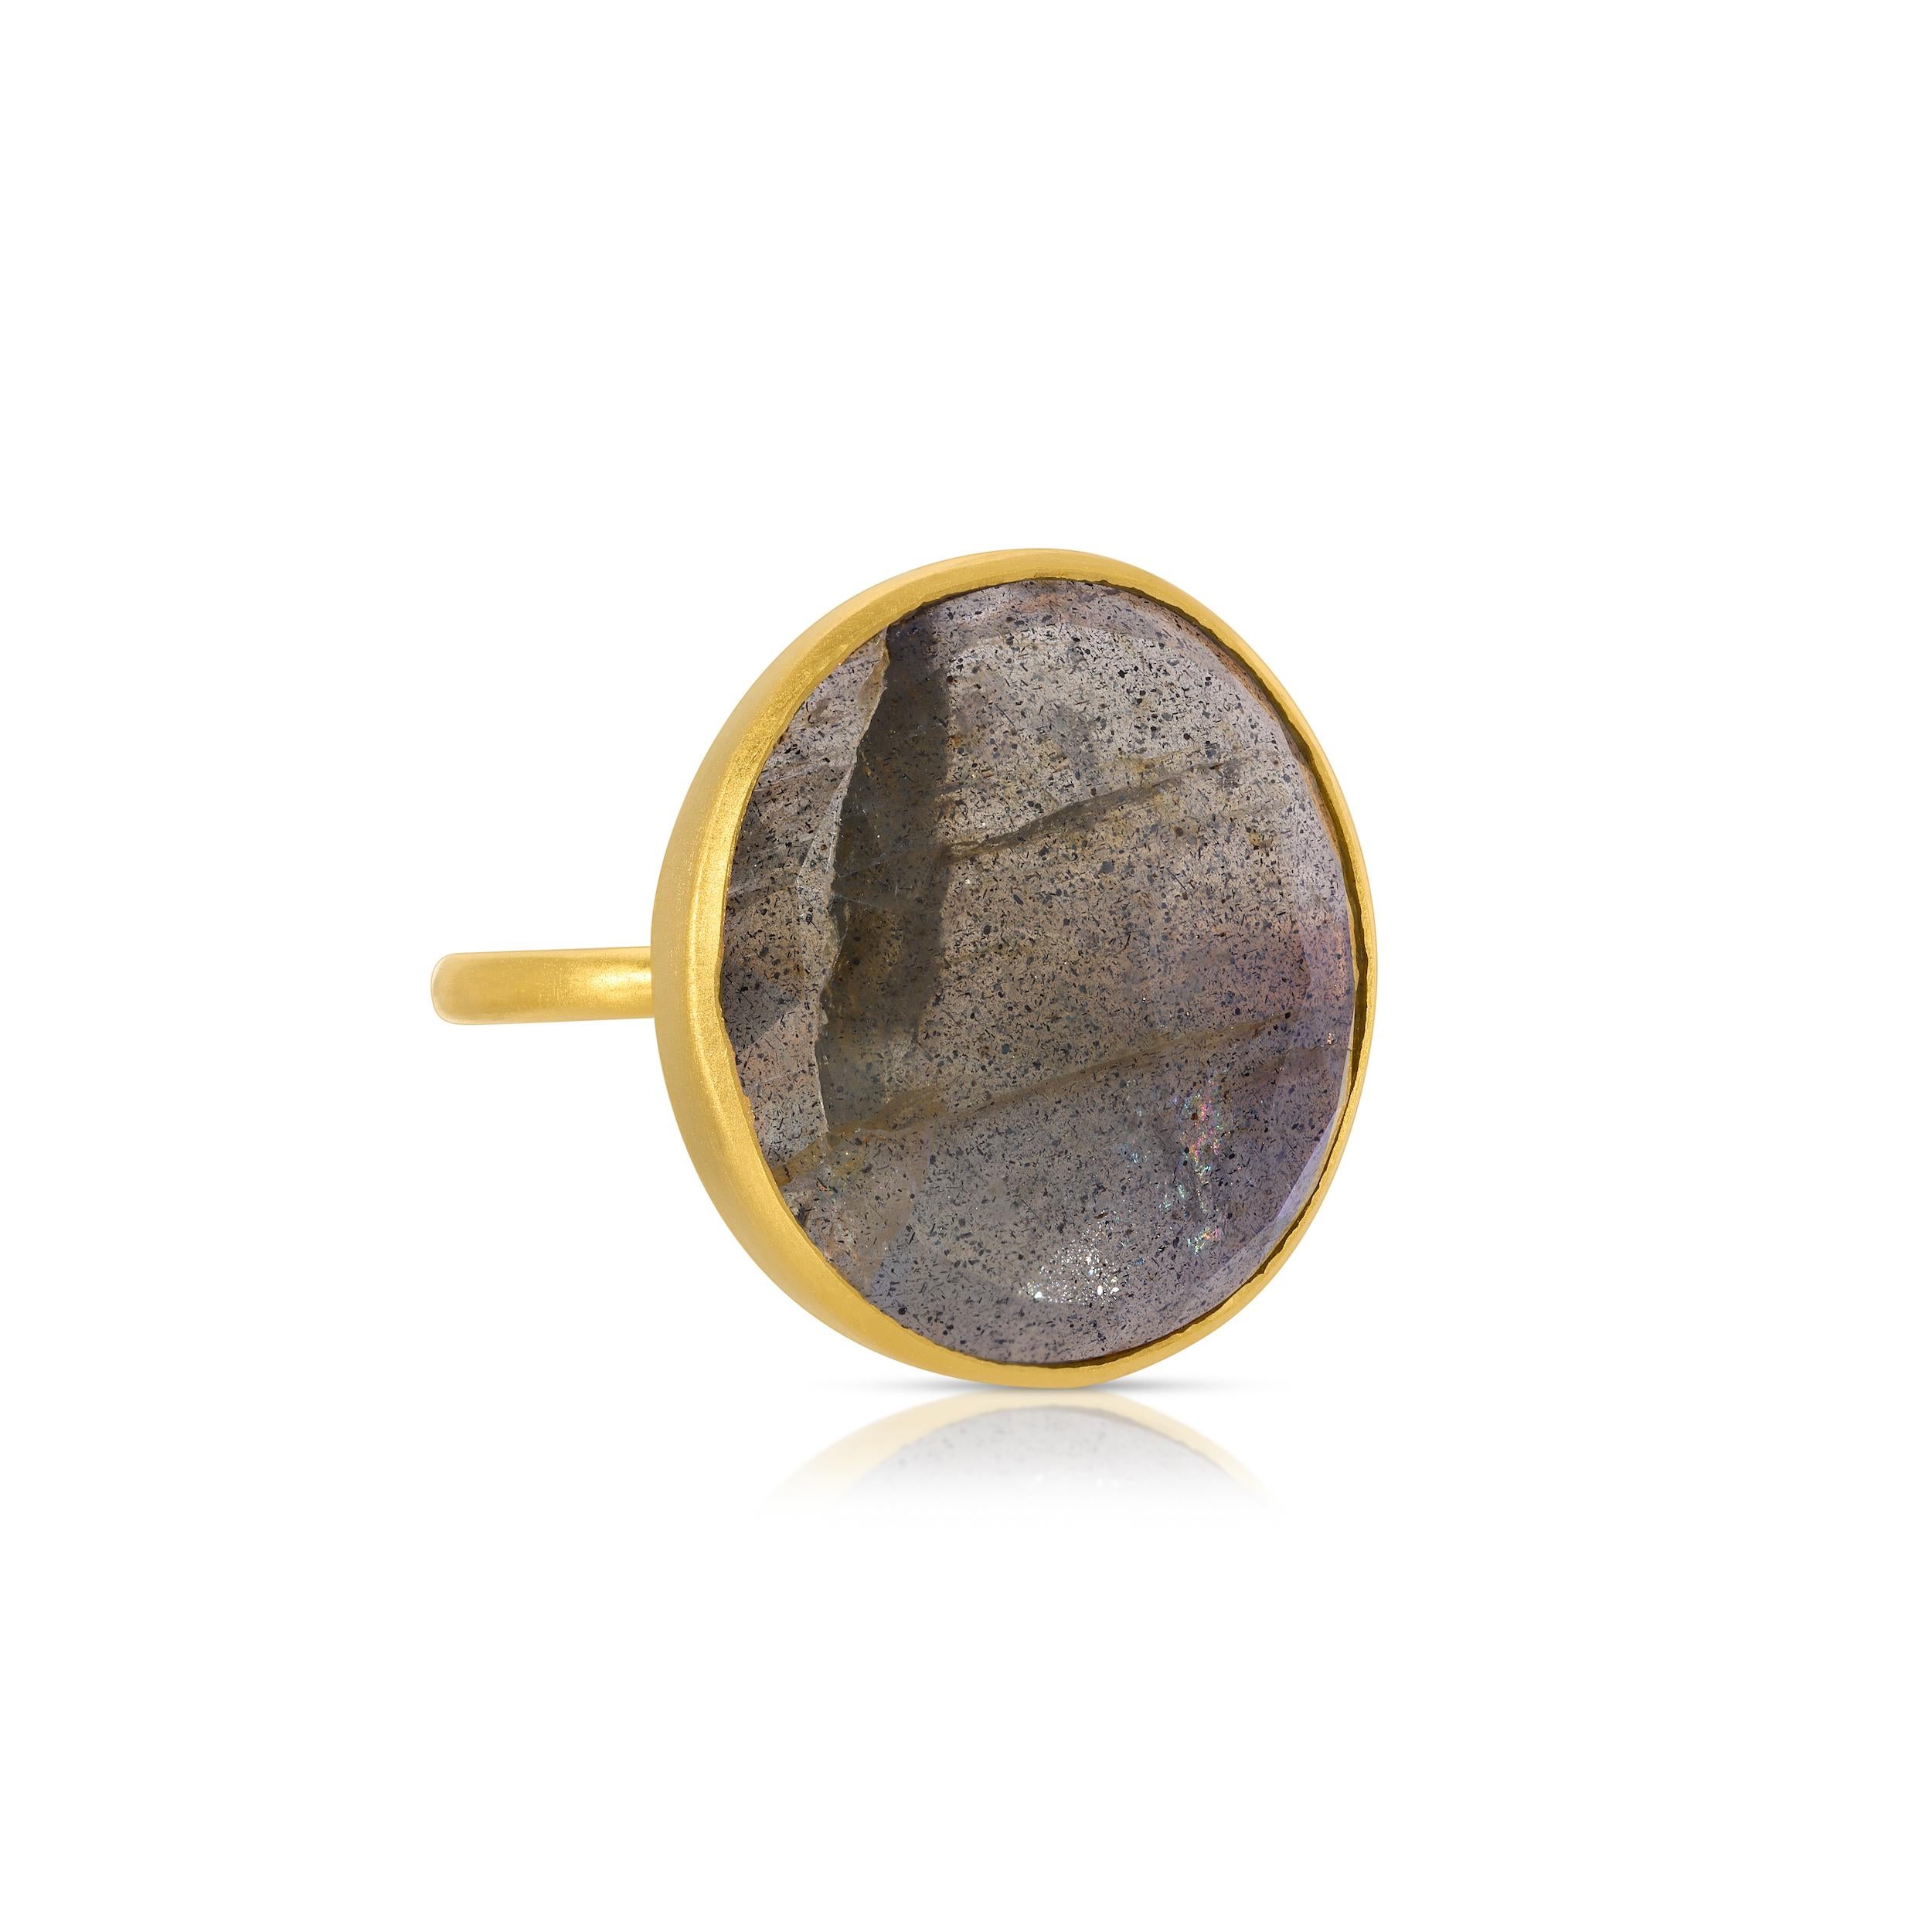 A fabulous cocktail featuring a beautiful dome shaped gemstone. This ring features an 18 Carat natural Labradorite with an exceptional electric blue undertone in a modern raised setting. This ring is set in 22 Karat Gold overlay Silver.